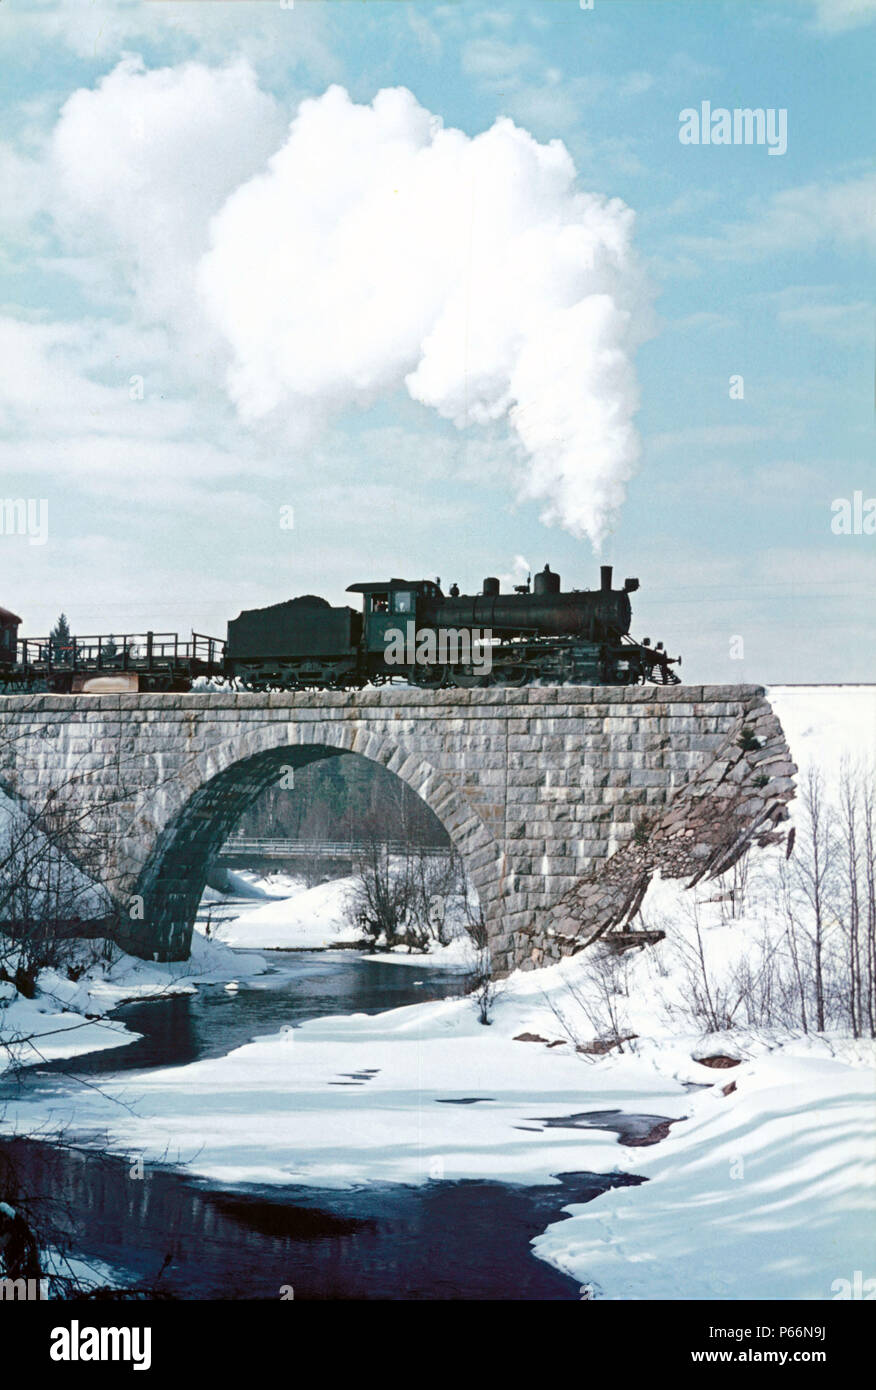 Finland's frozen rivers begin to flow again as springtime advances. Here at Hyrynsalmi, Finnish Railway's TV1 Class 2-8-0 No.921 heads a train enginee Stock Photo